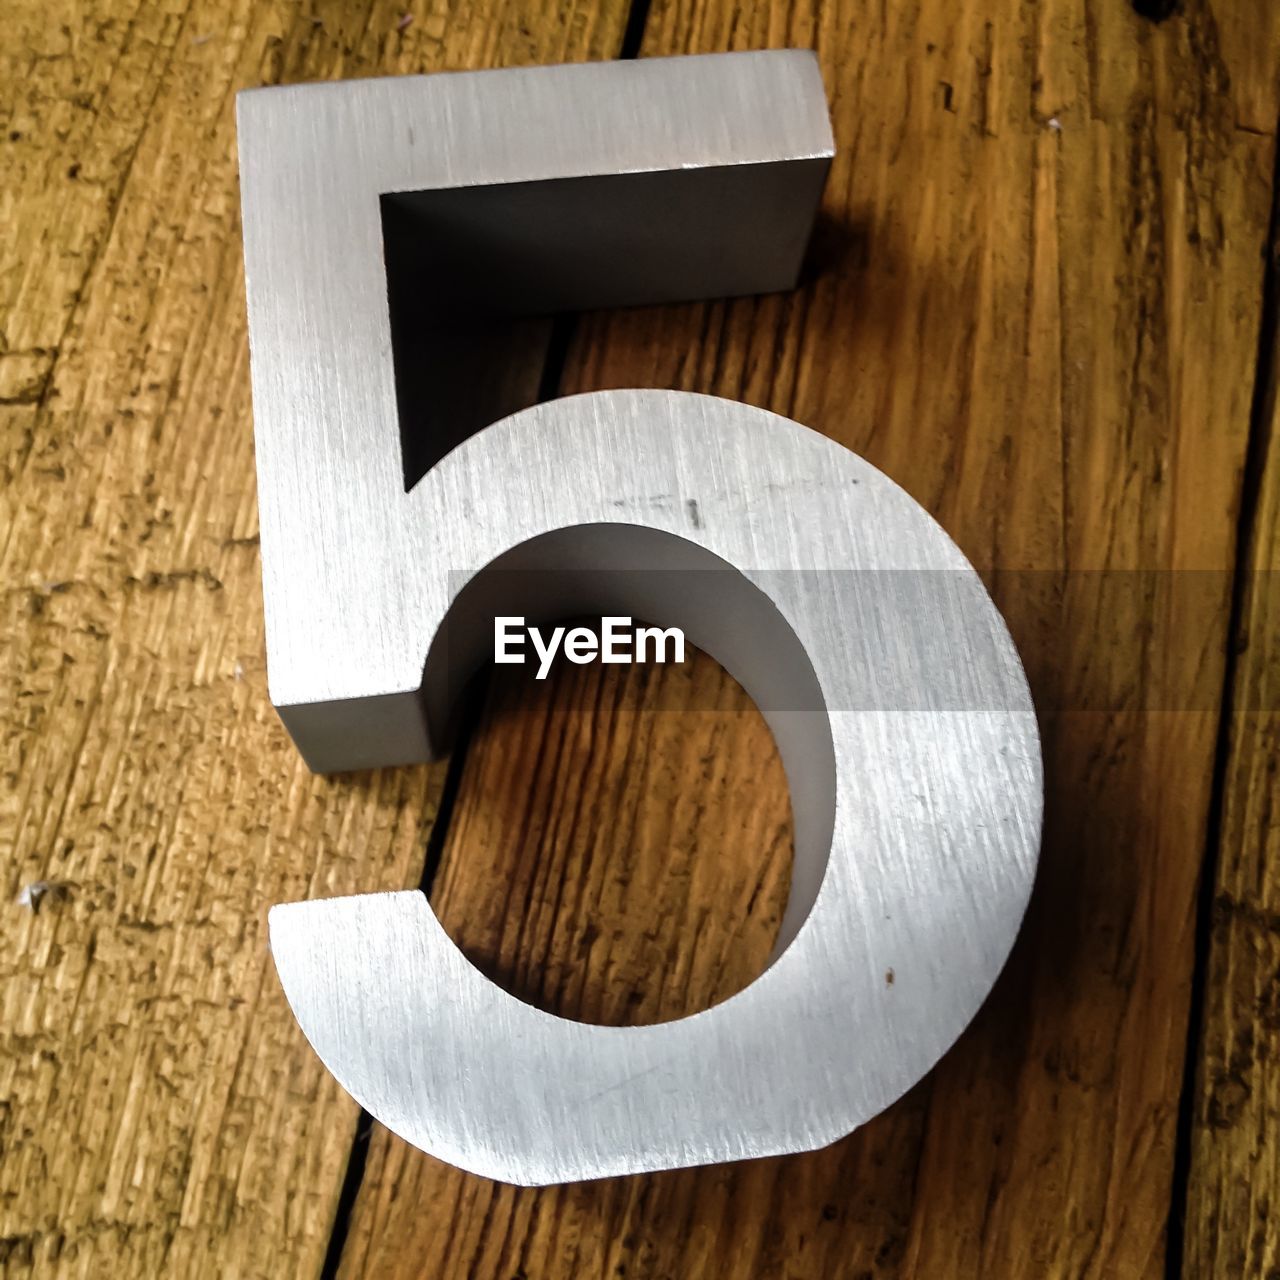 High angle view of number on wooden table